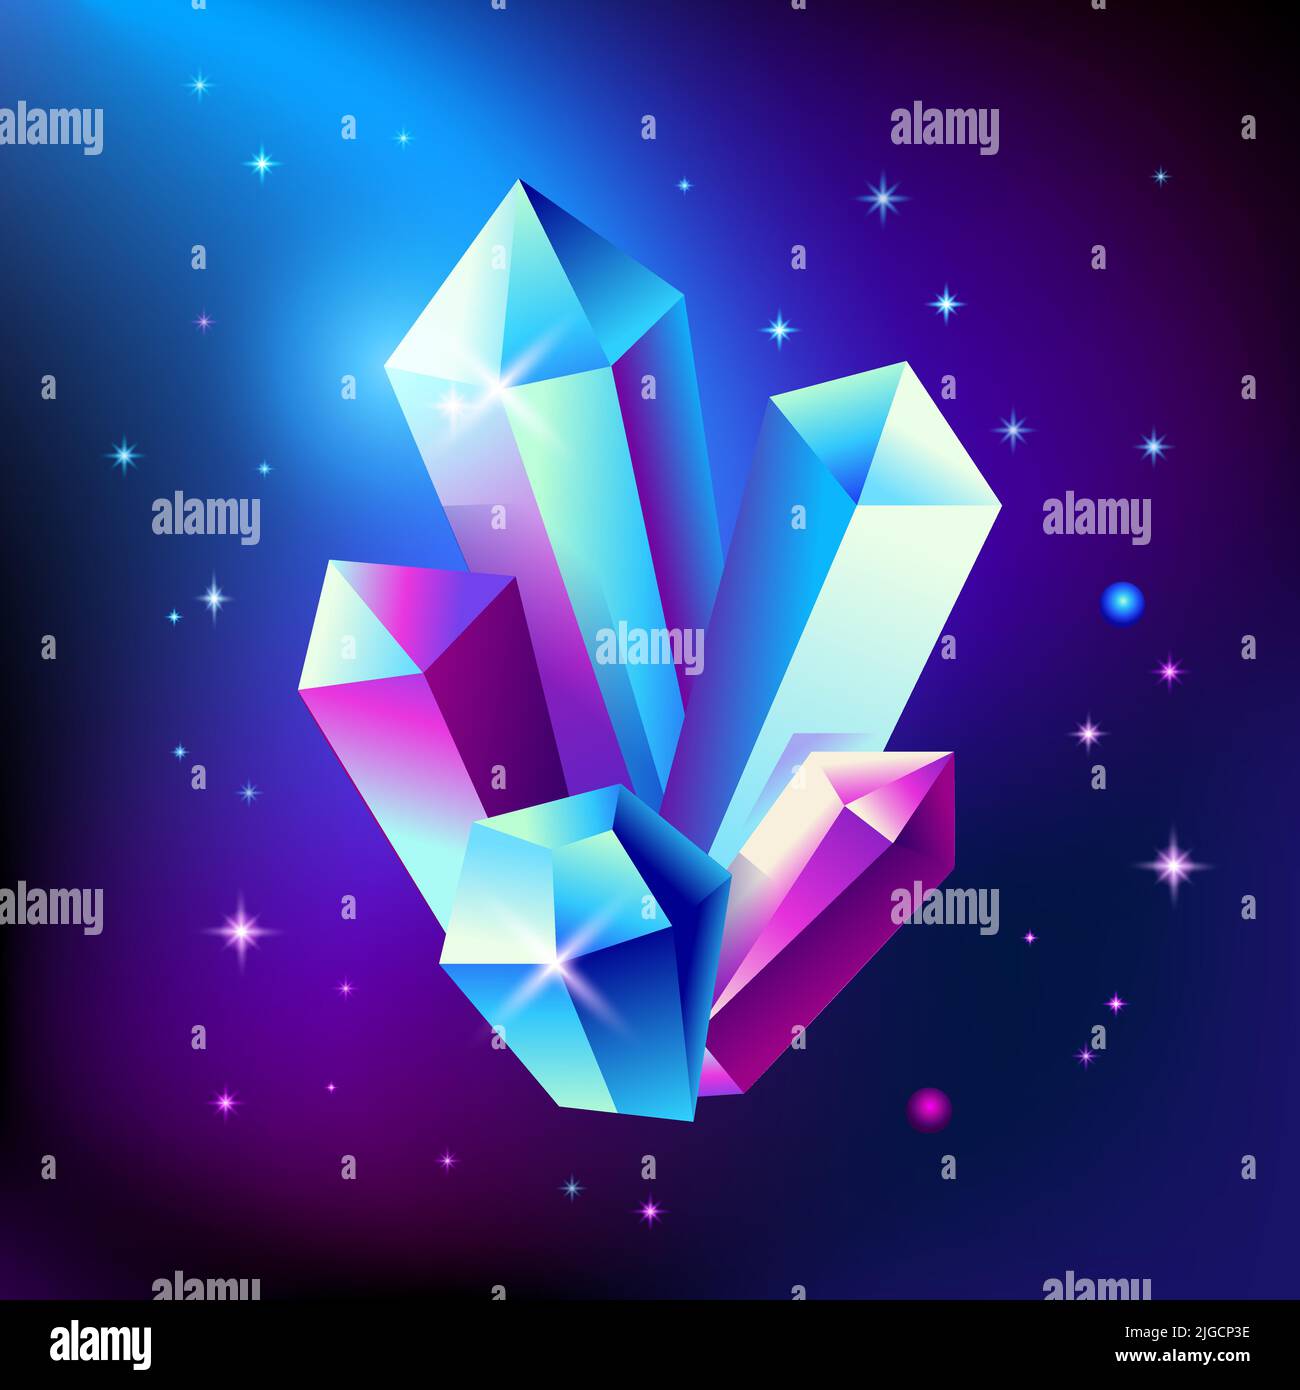 Abstract trendy cosmic poster with crystal gems and pyramid geometric shapes in space. Neon galaxy background. 80s style. Poster with geometric Stock Vector